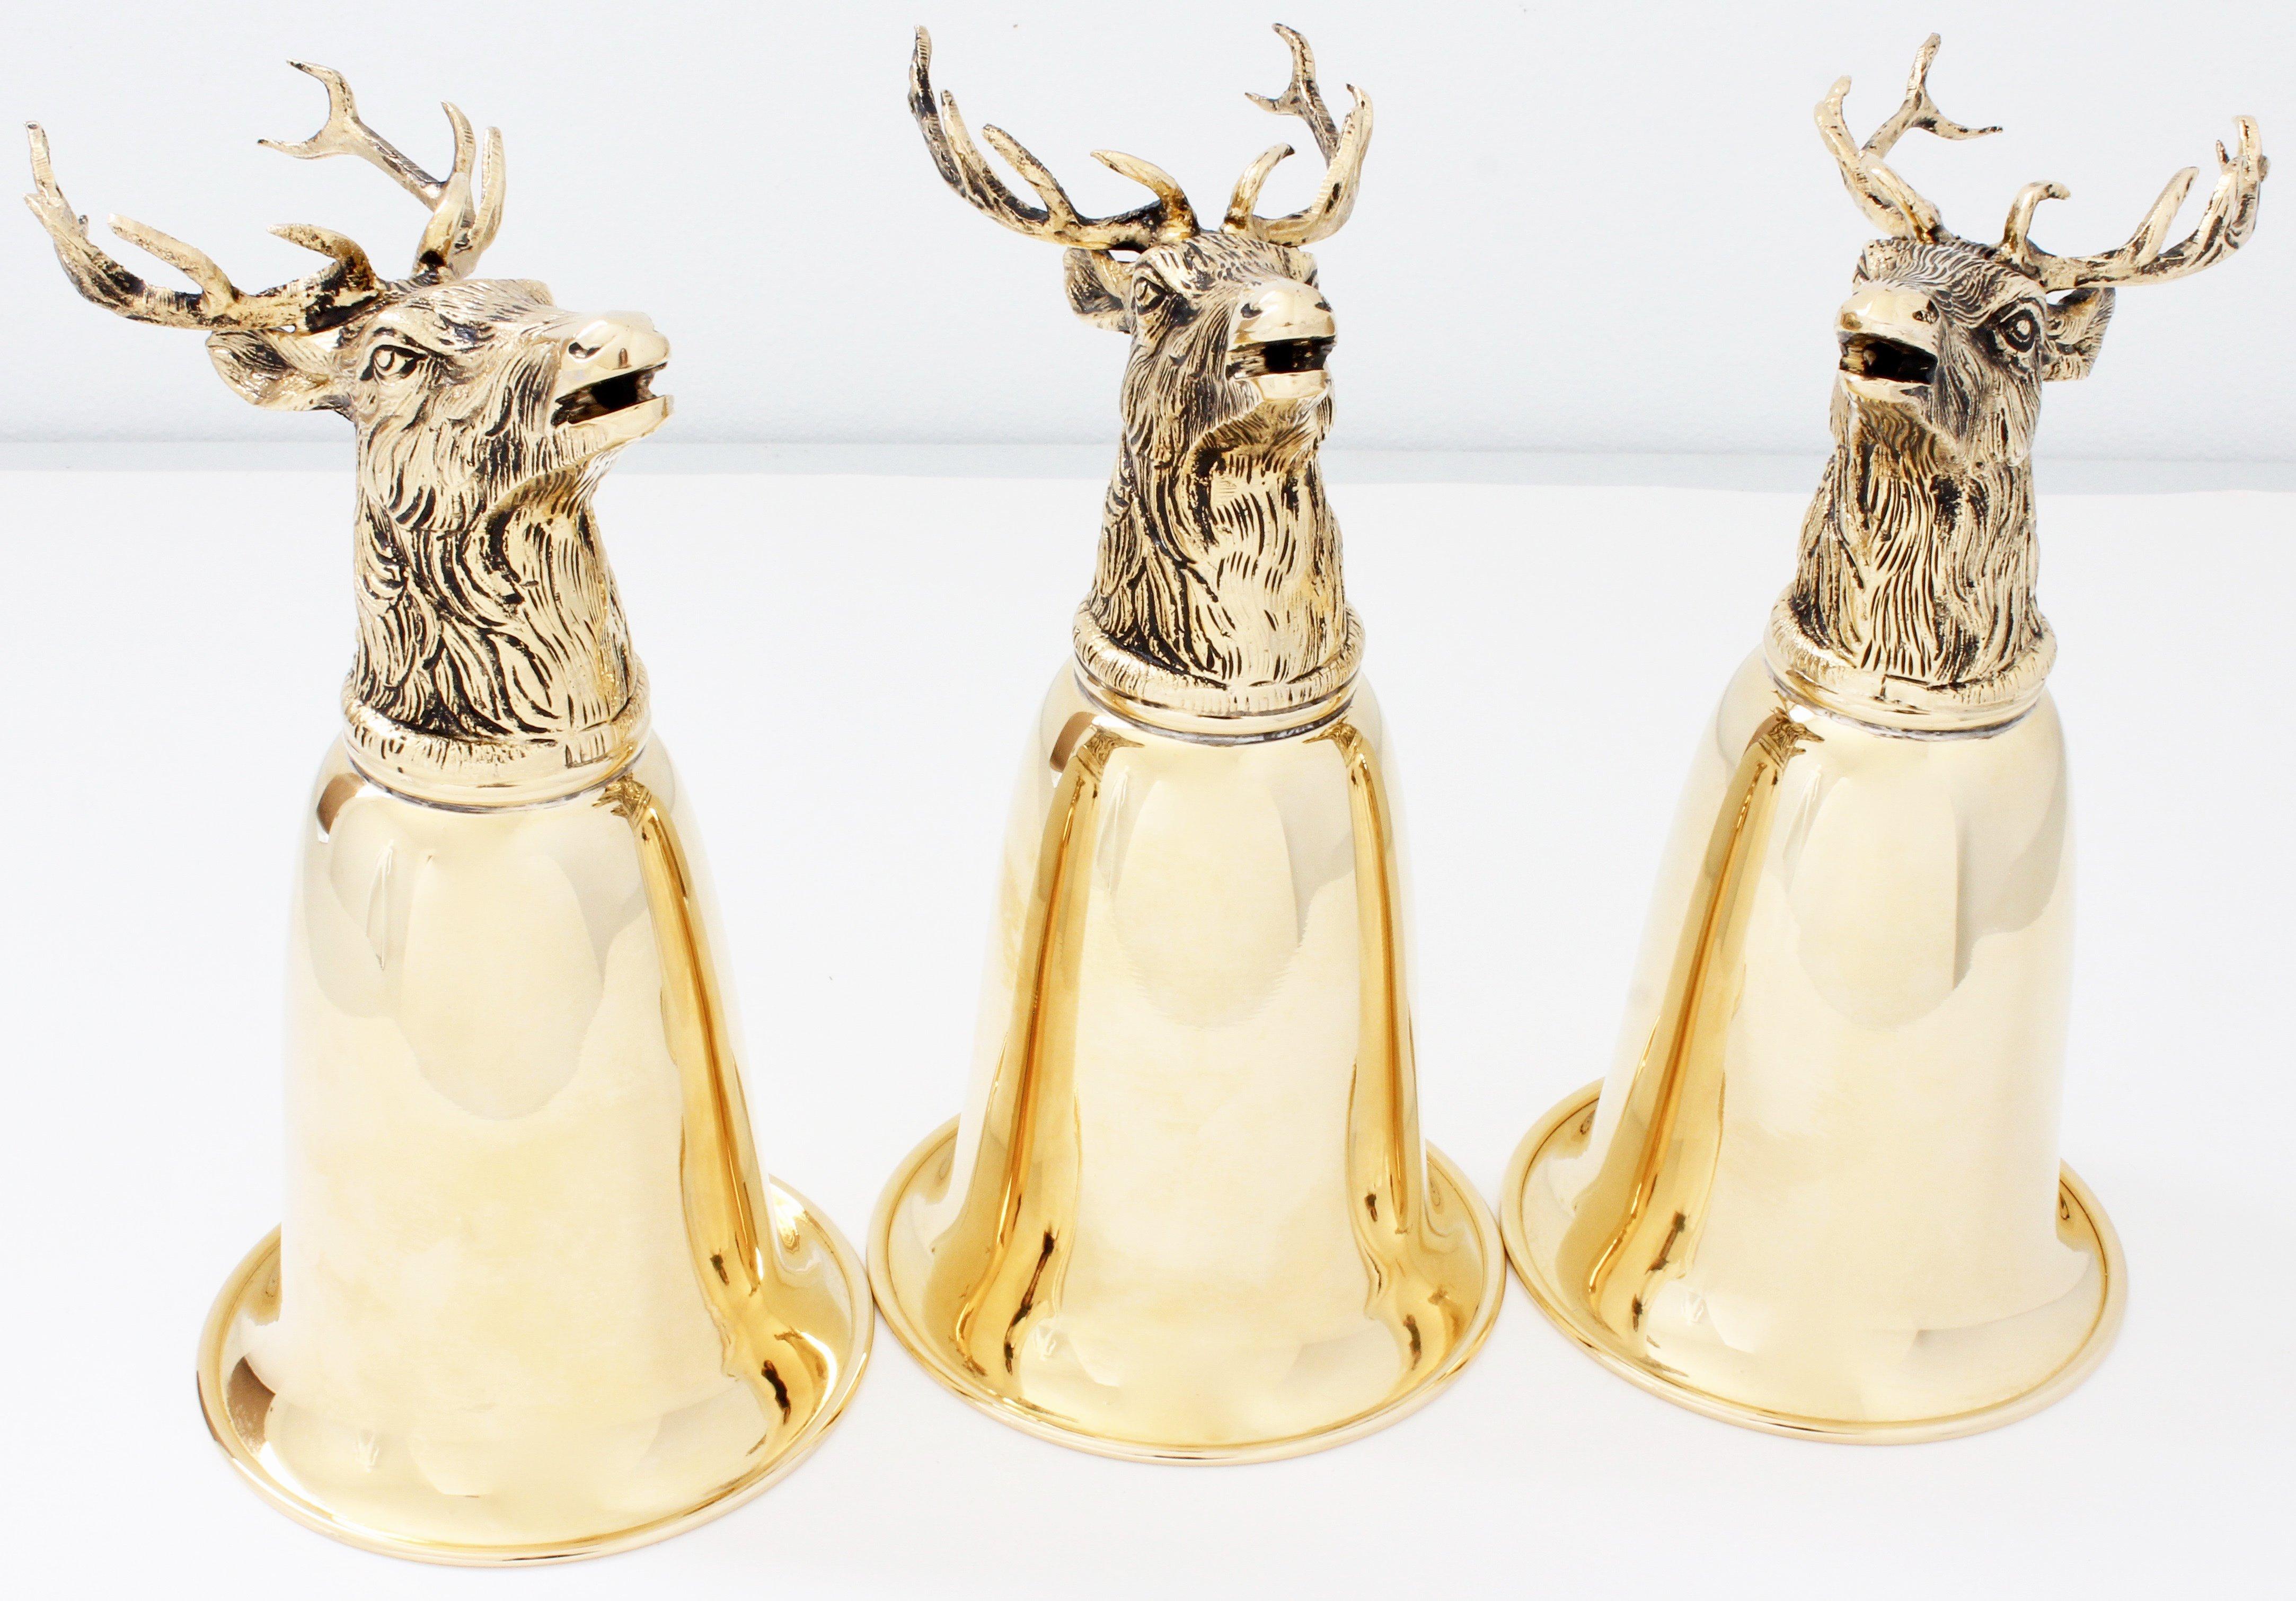 Entertain in high style with this whimsical three-piece barware set, made by Gucci in the early 1980s. Each goblet or drinking cup features a stag head with antlers as the base and a wide brim at top. Perfect for the collector, interior designer or